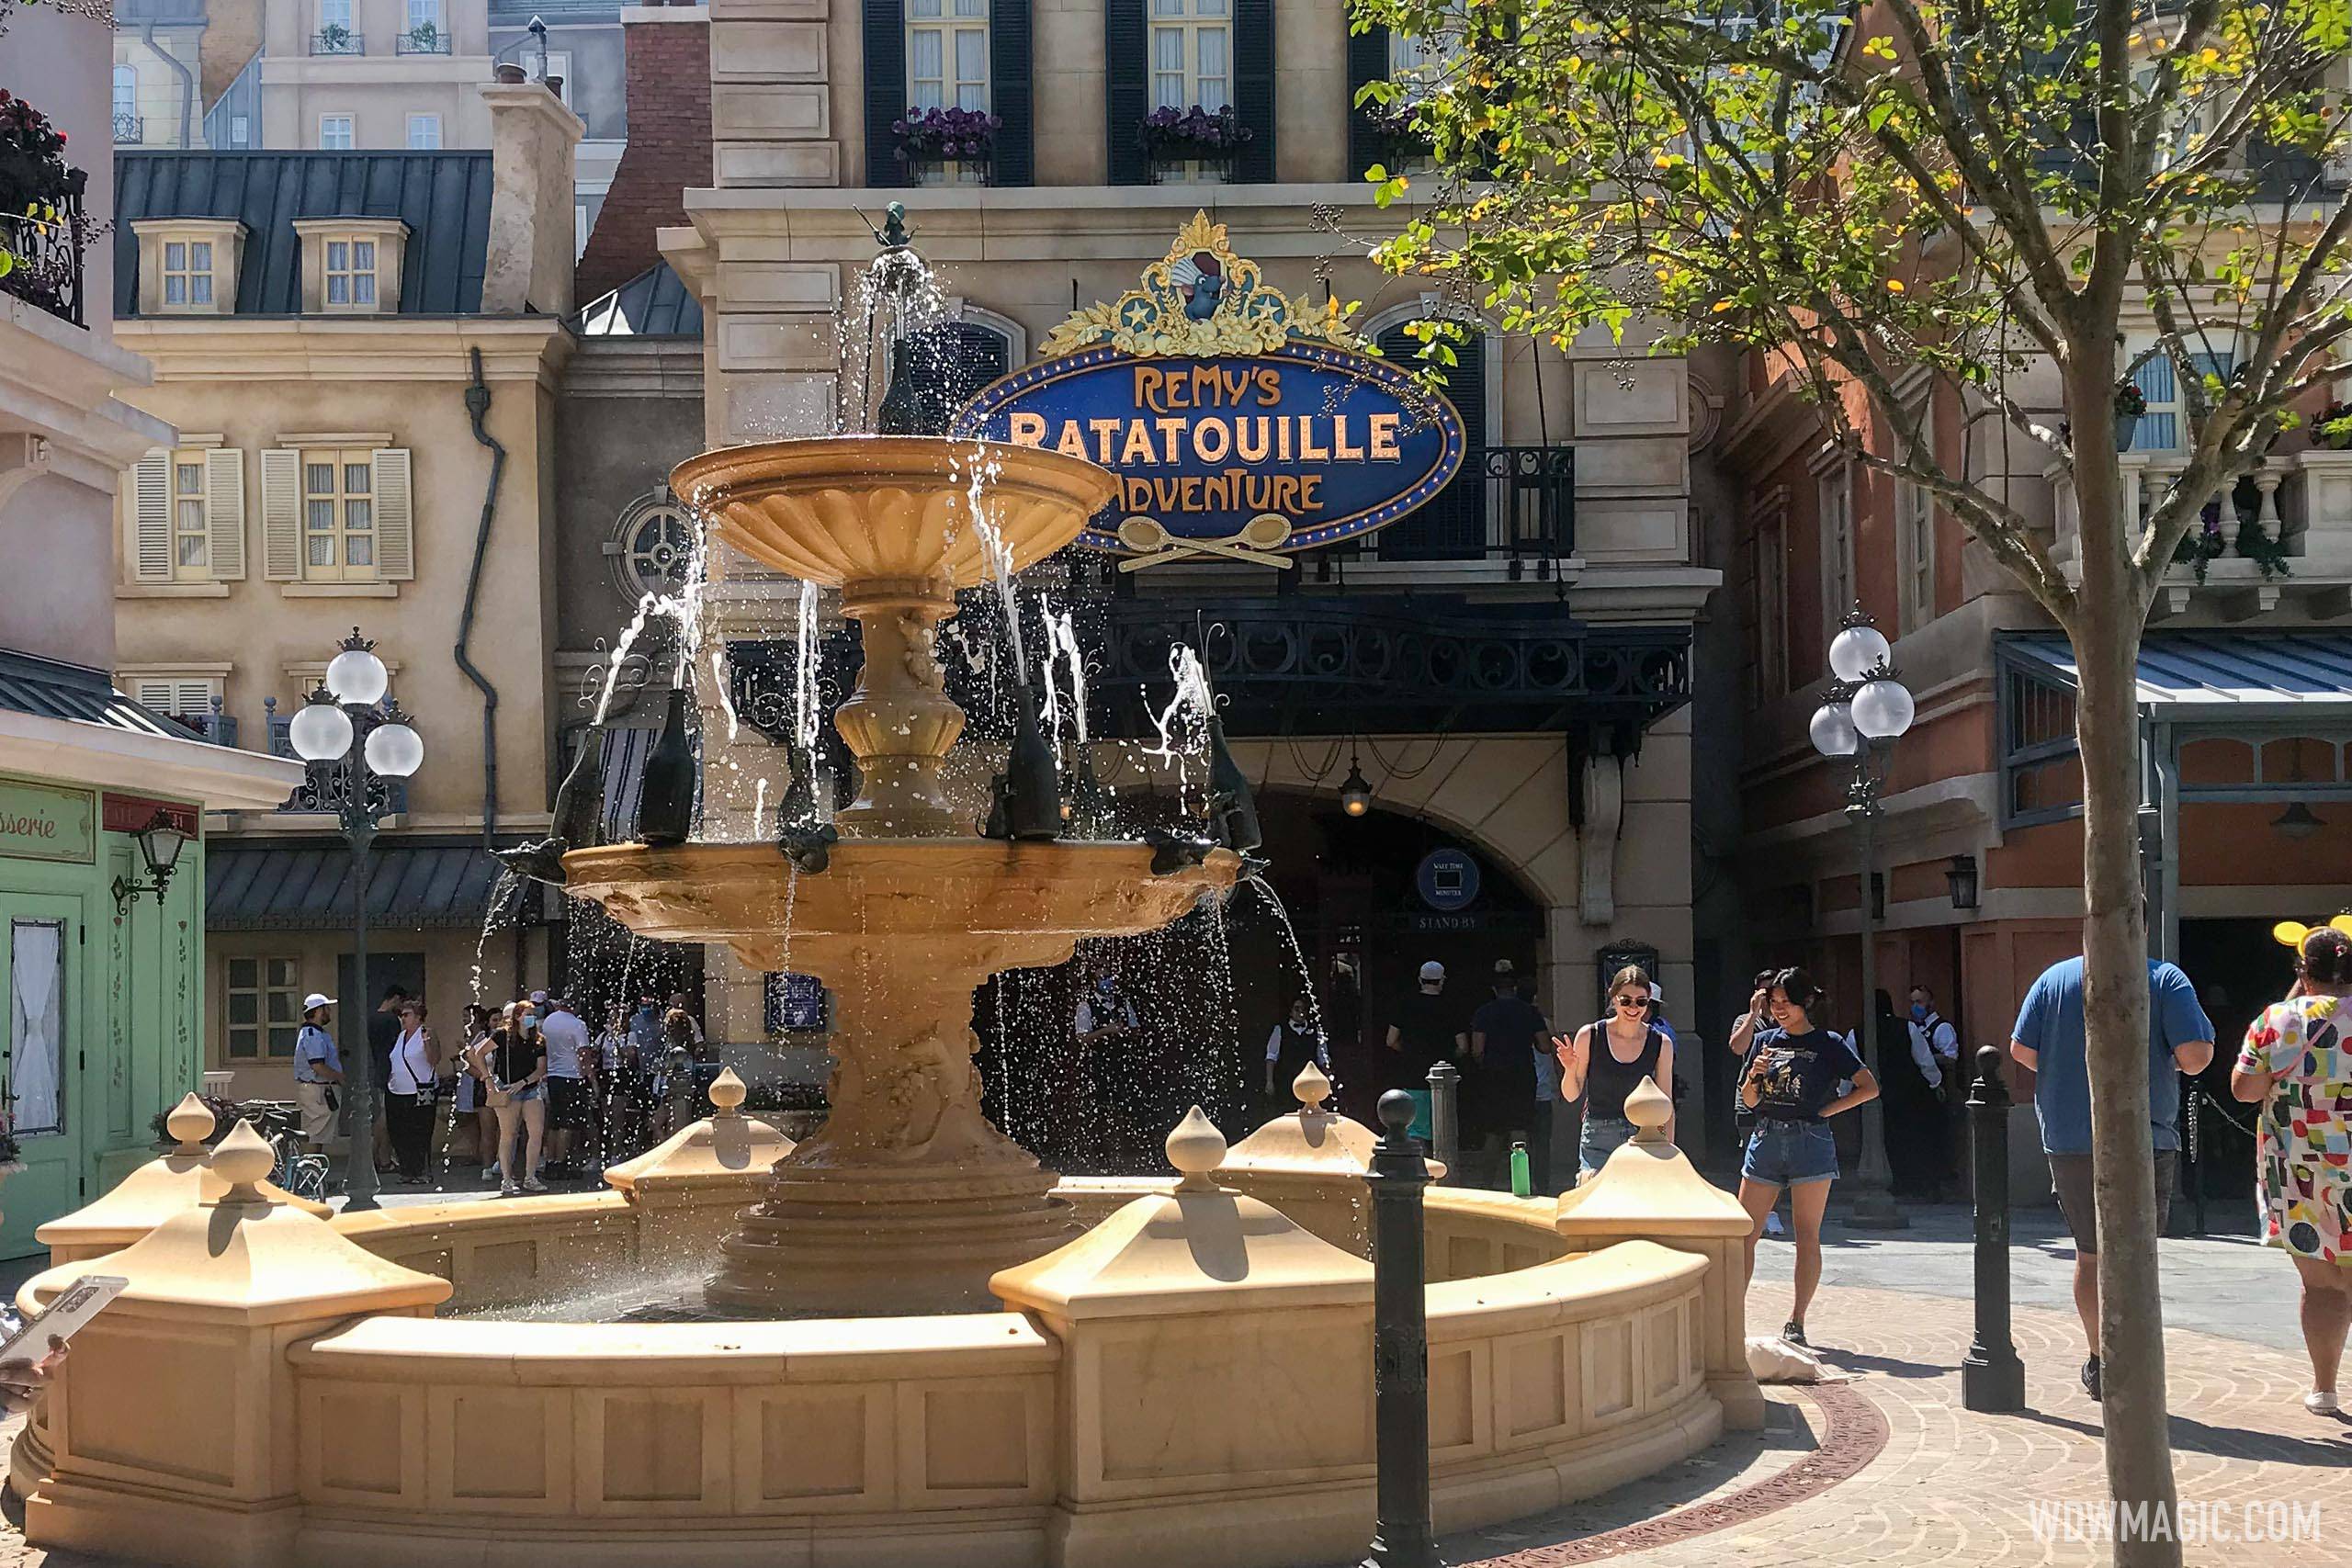 First look inside Remy's Ratatouille Adventure at EPCOT